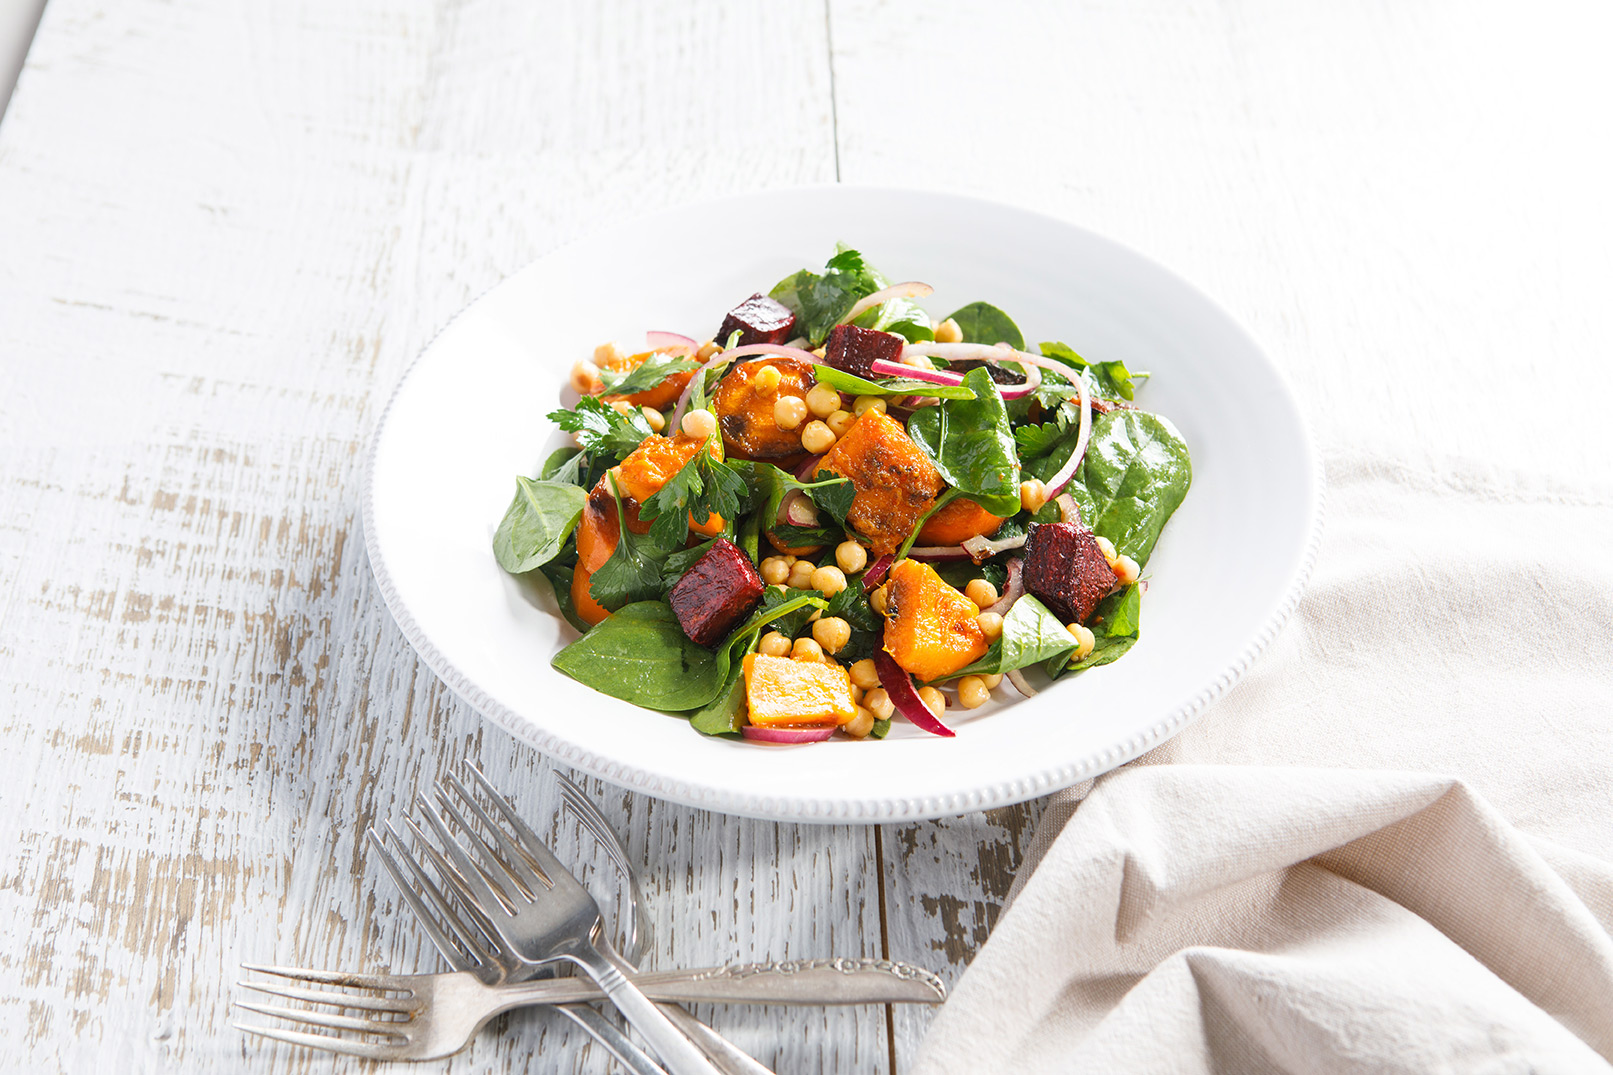 Image of roast vegetable and chickpea salad in a white bowl shot from the side on a wooden table with accompanying forks.